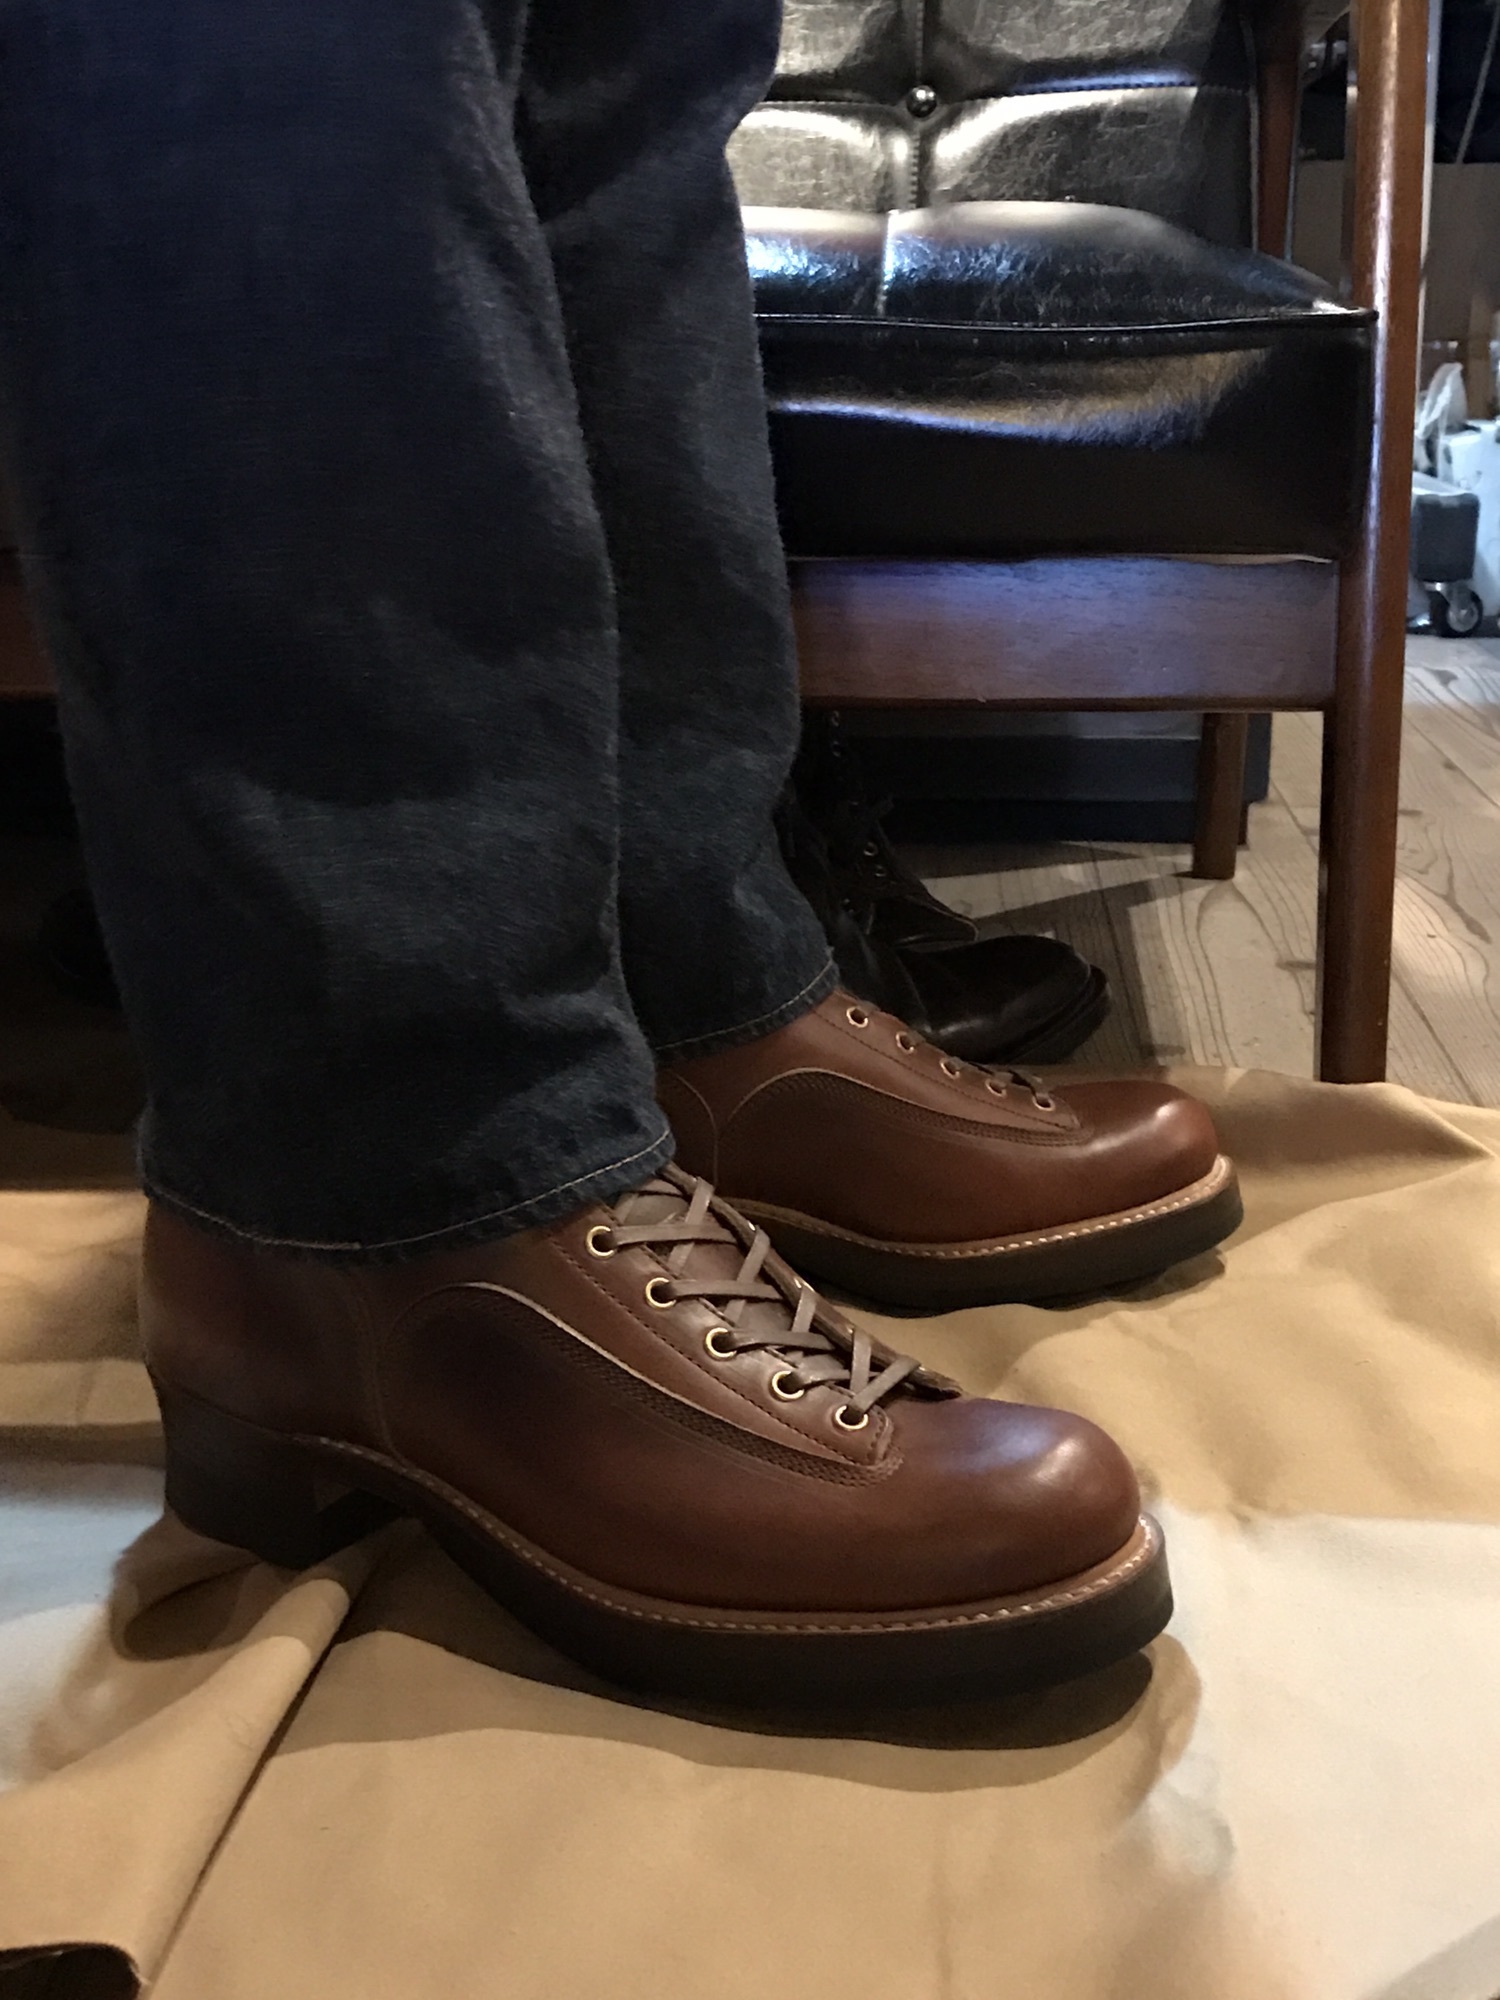 Clinch boots order Lineman Boots | Genuine Jeans Shop Spiral